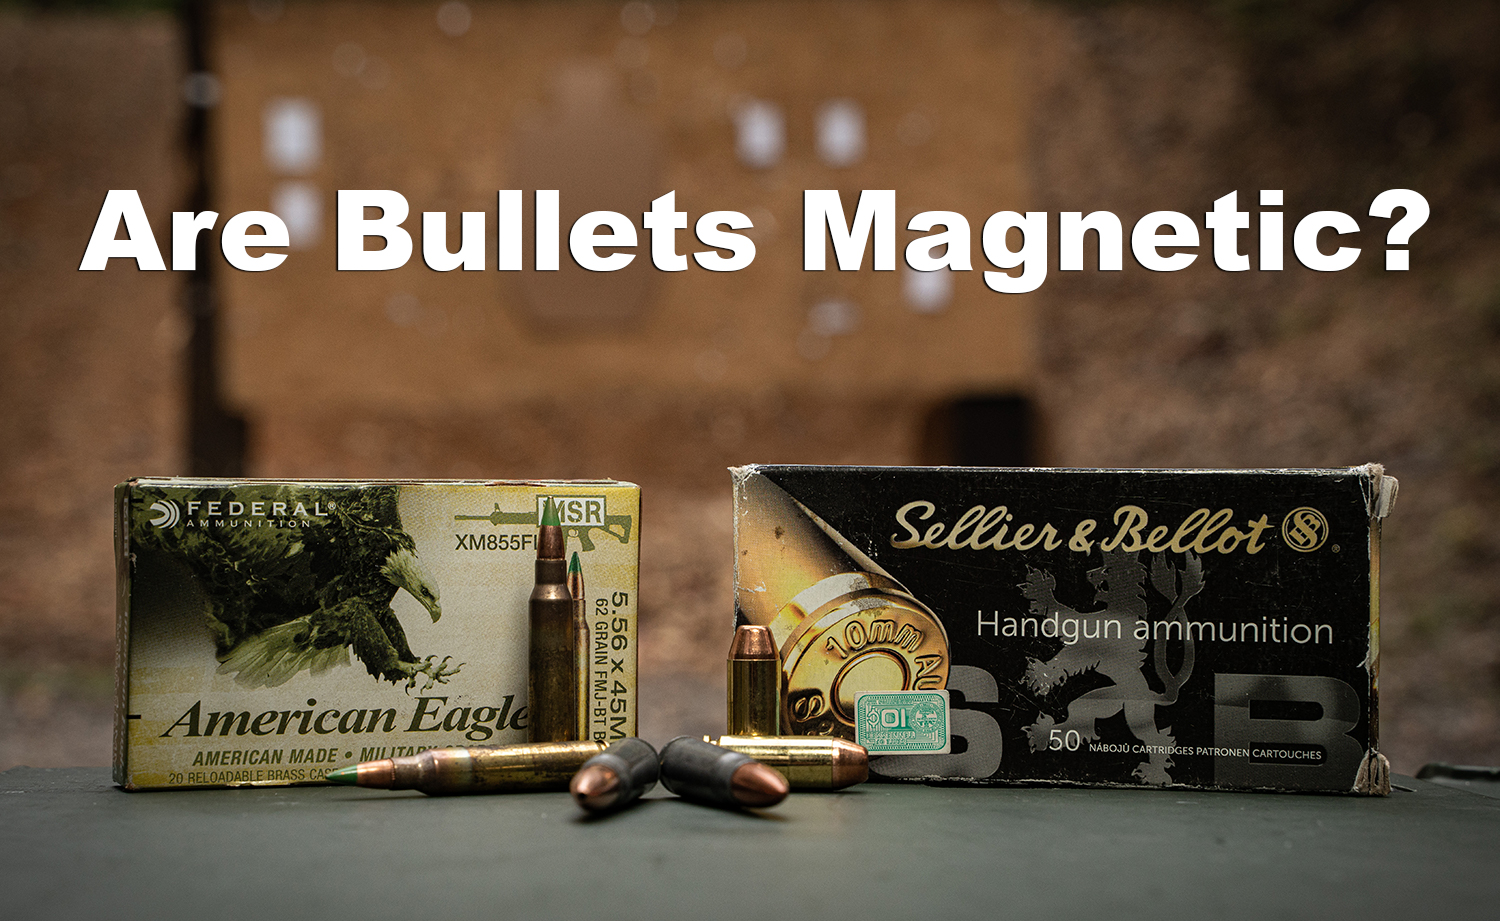 Brass cased and steel cased ammo that attracts a magnet